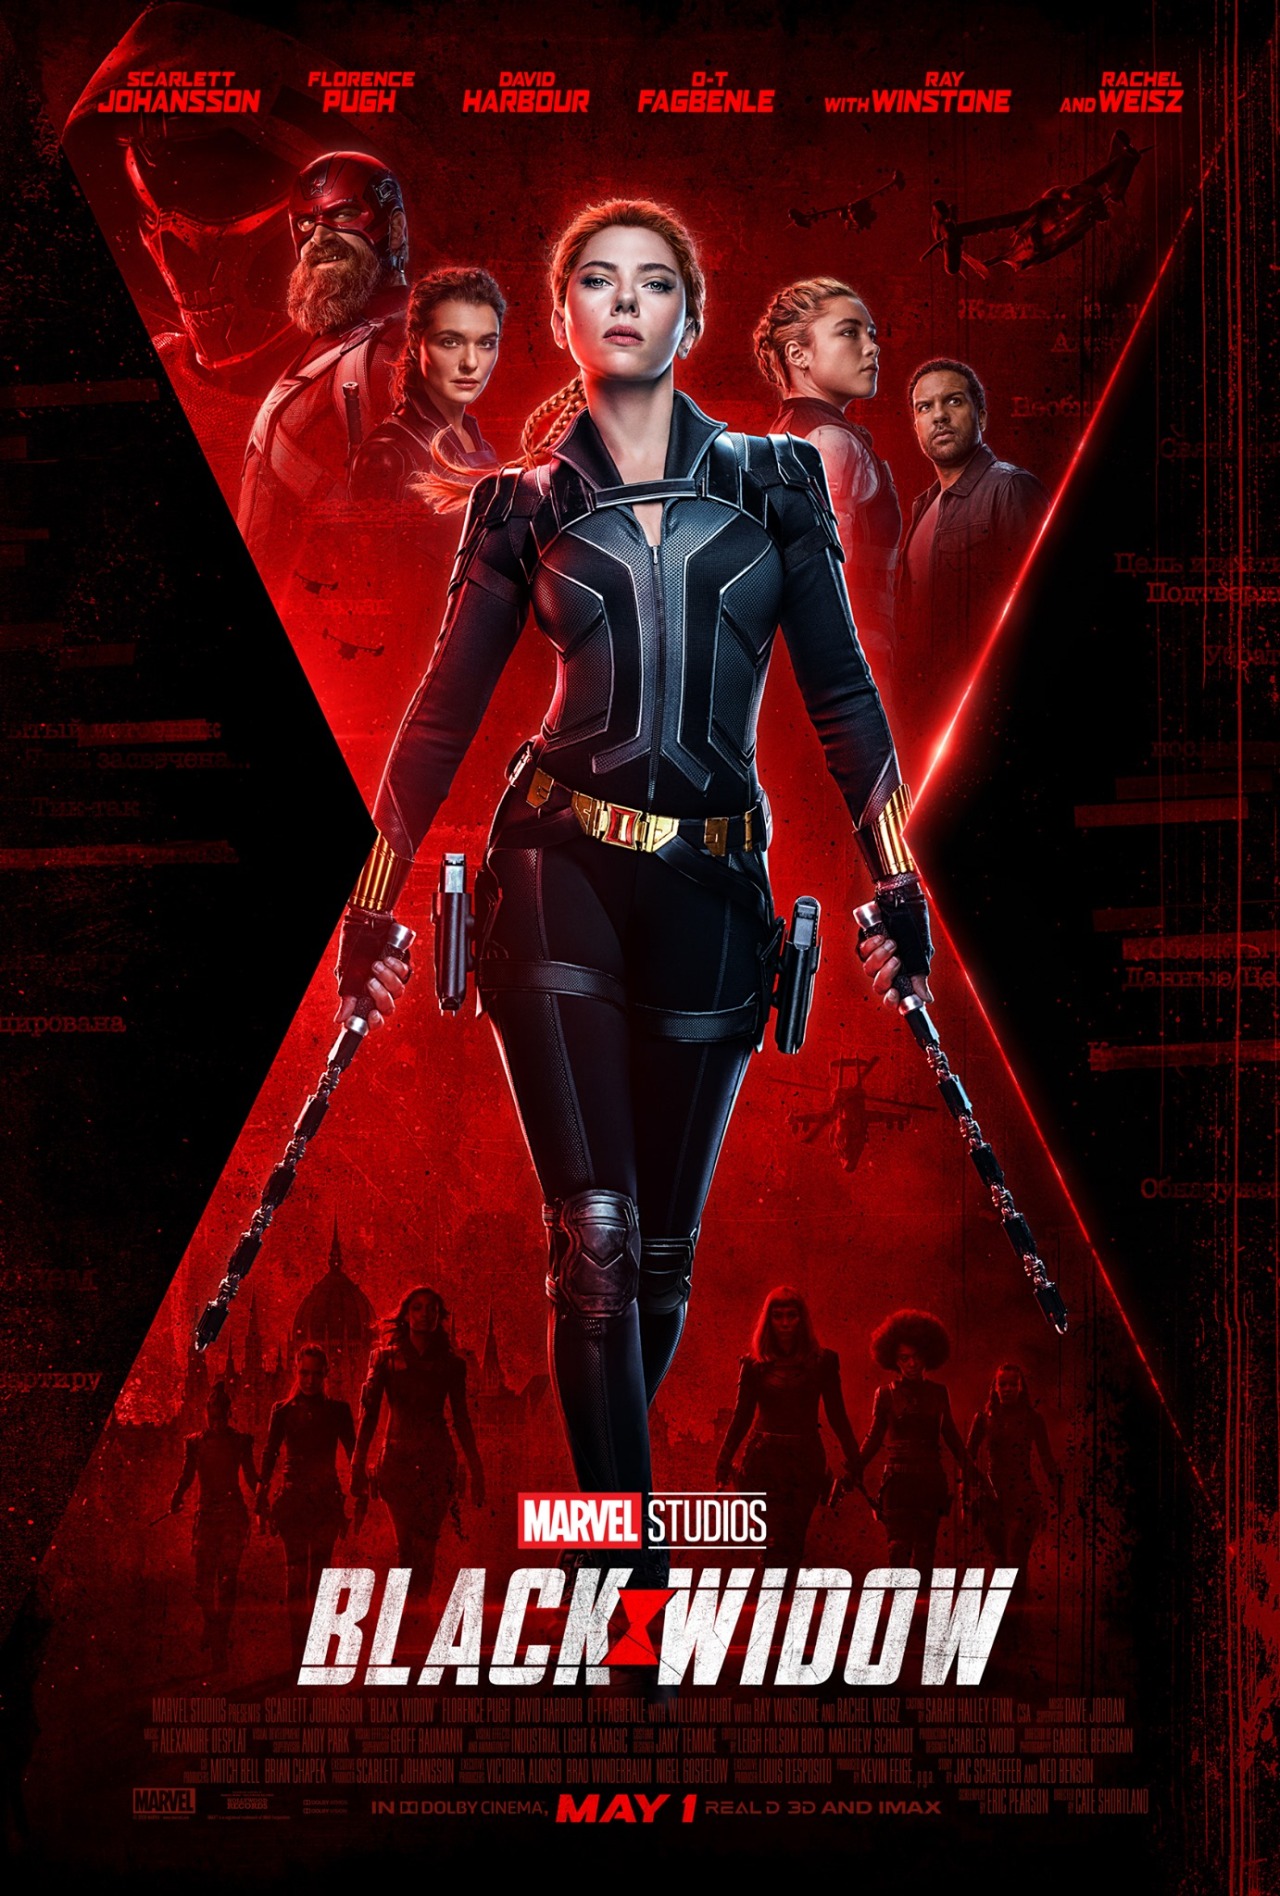 The theatrical opening of “Black Widow,” originally slated for April in Korea, has been delayed. (Marvel Studios)